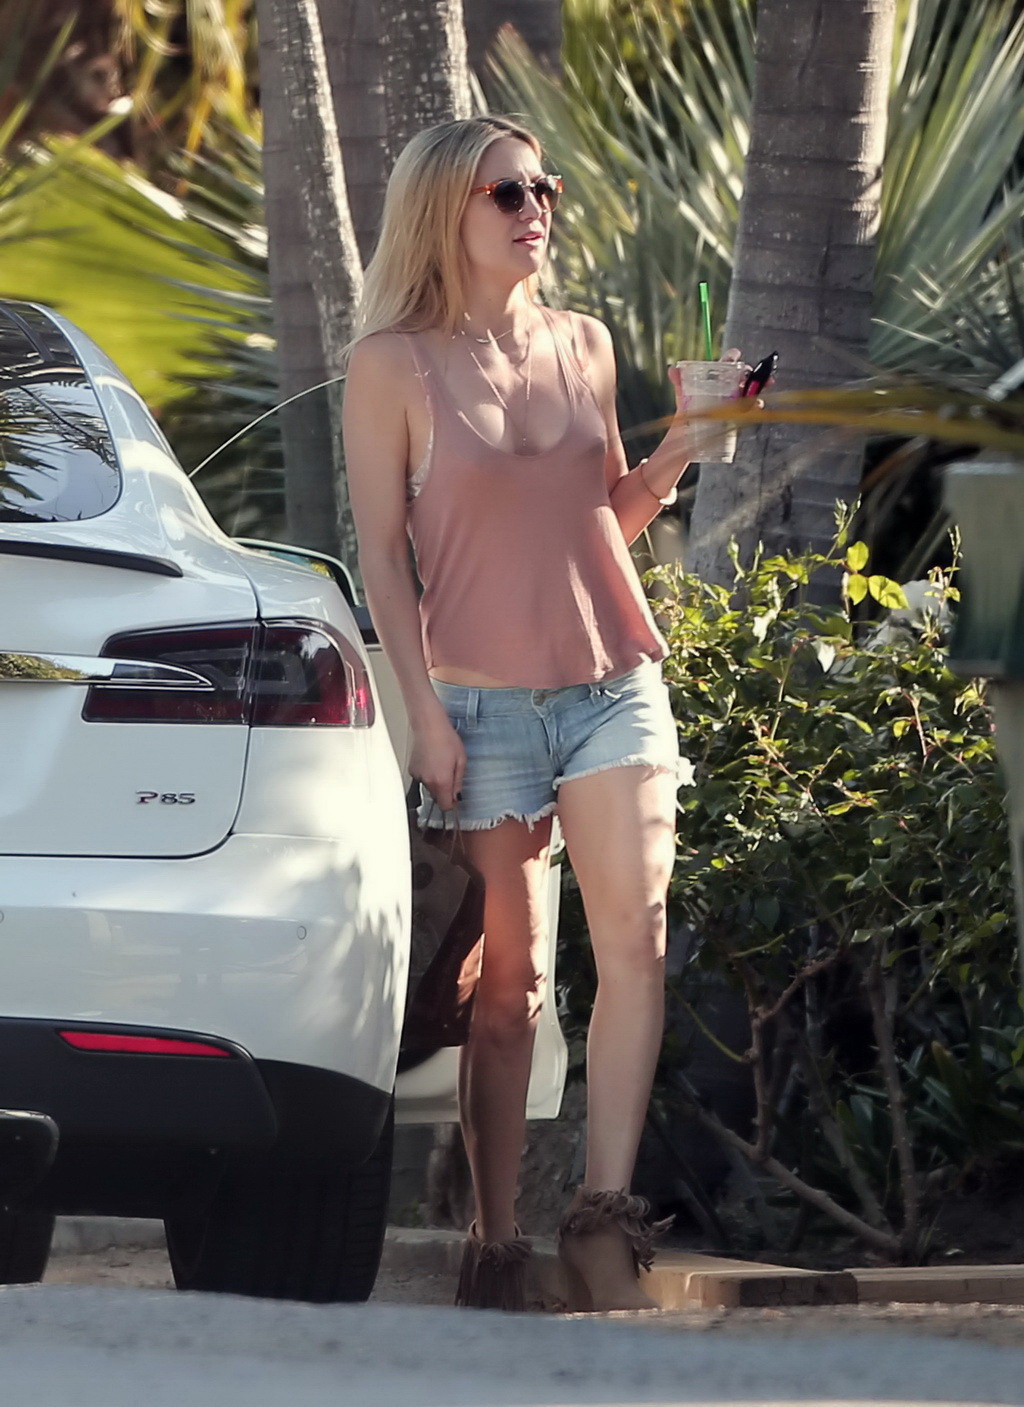 Kate Hudson bra peek and leggy in tiny tank top and denim shorts while out for a #75170709